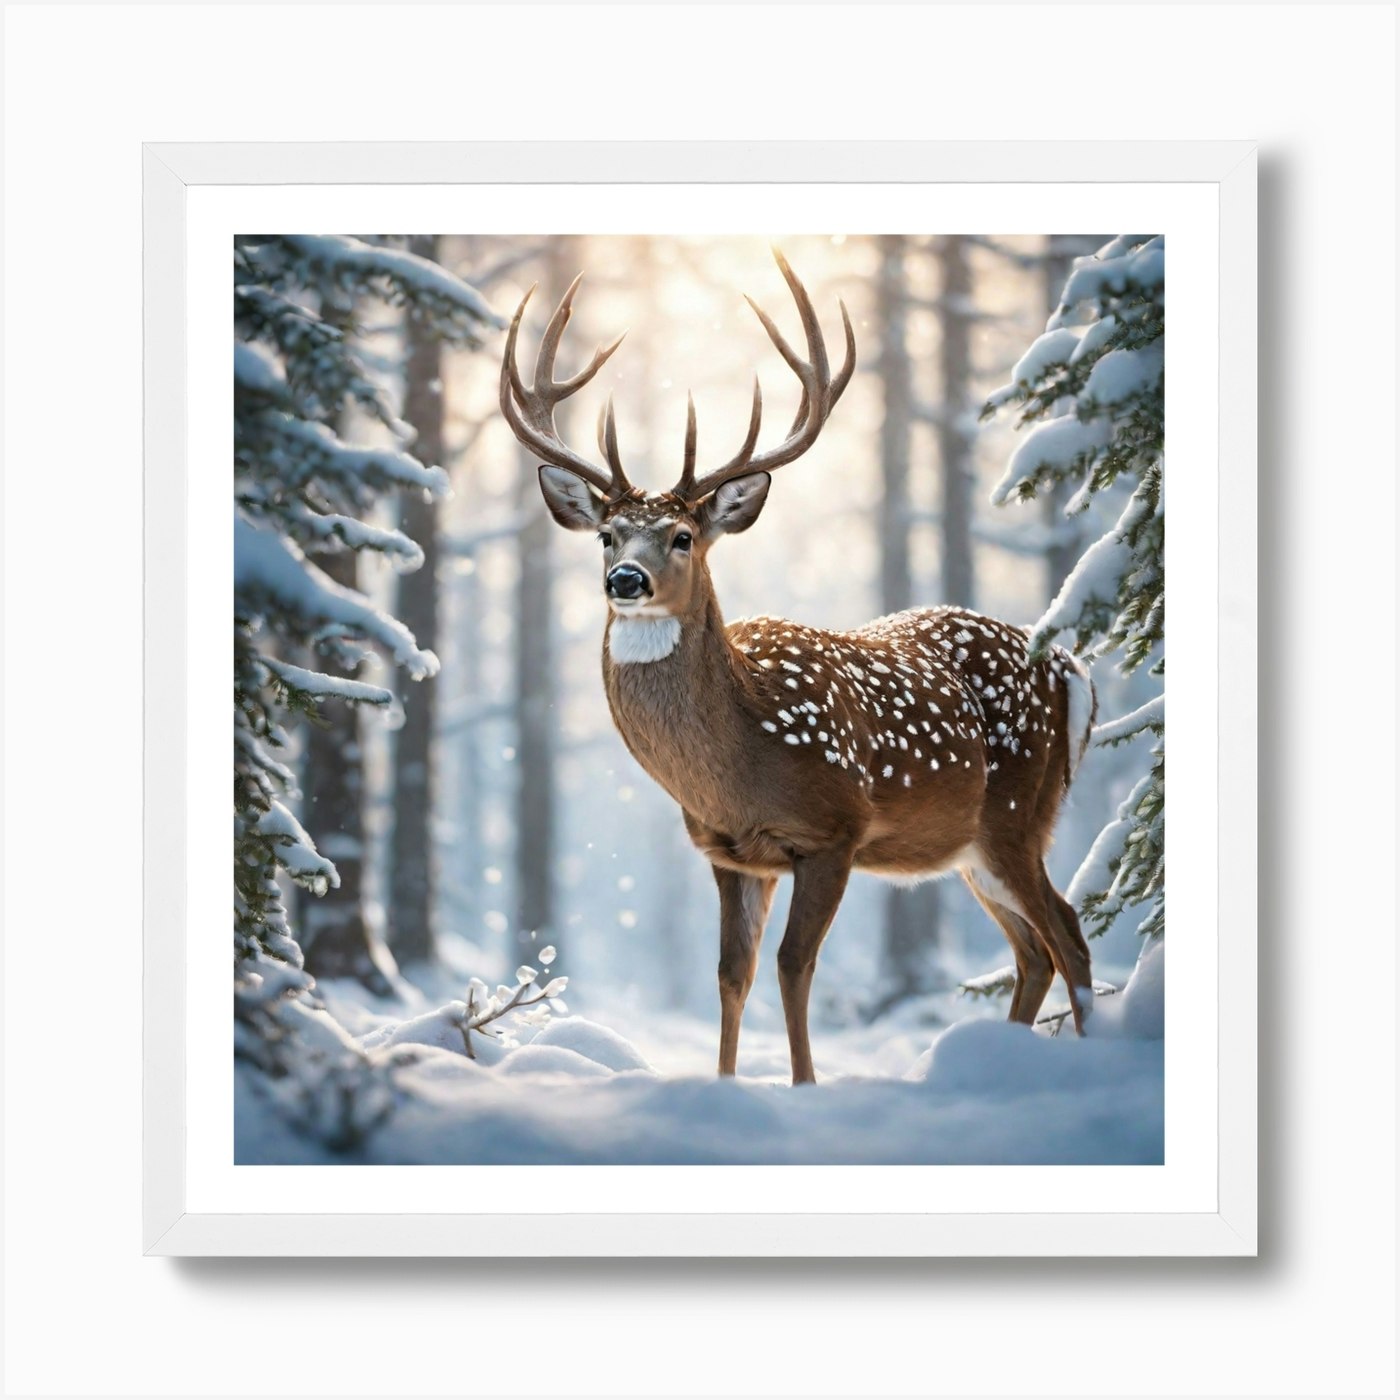 Whitetail Deer In A Field Diamond Painting 